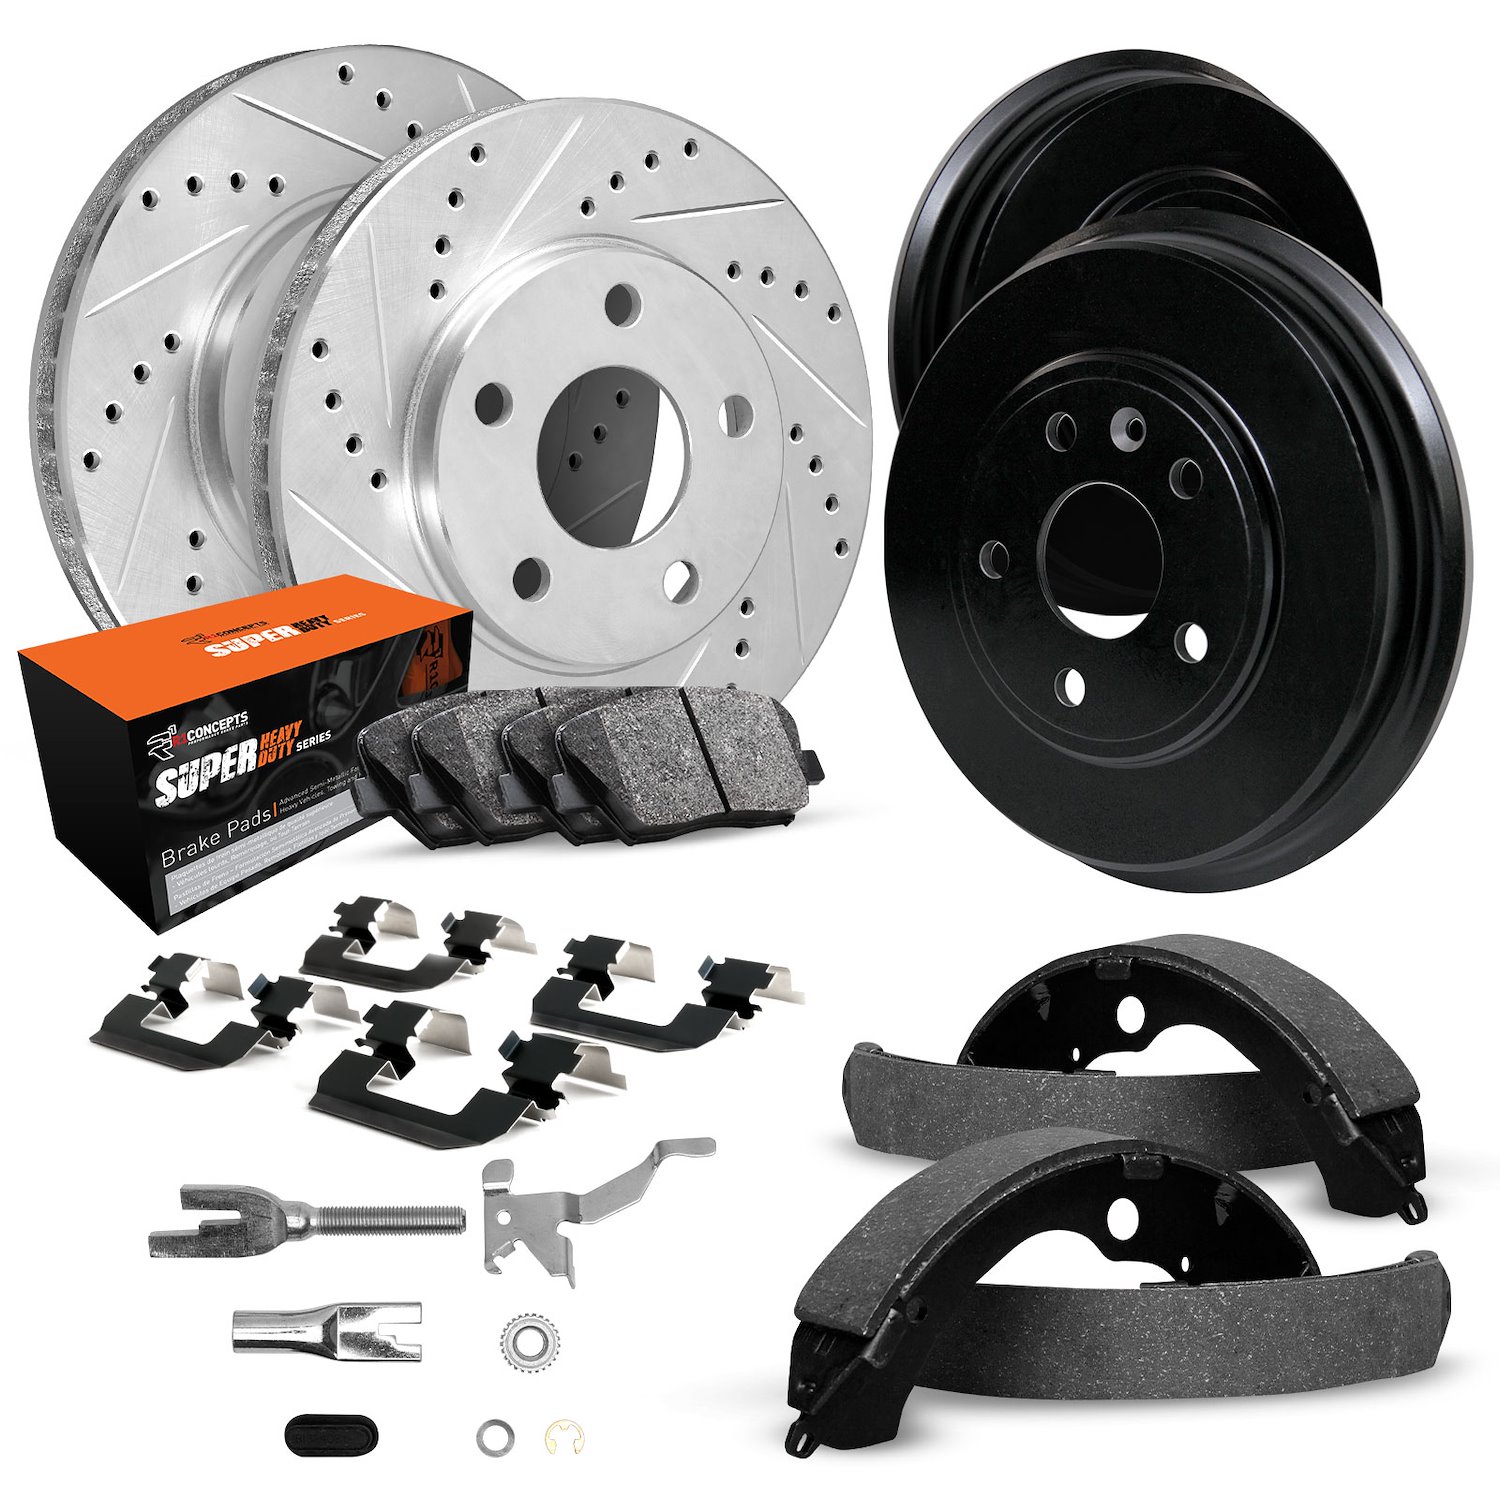 E-Line Drilled/Slotted Silver Rotor & Drum Set w/Super-Duty Pads, Shoes/Hardware/Adjusters, 2001-2002 GM